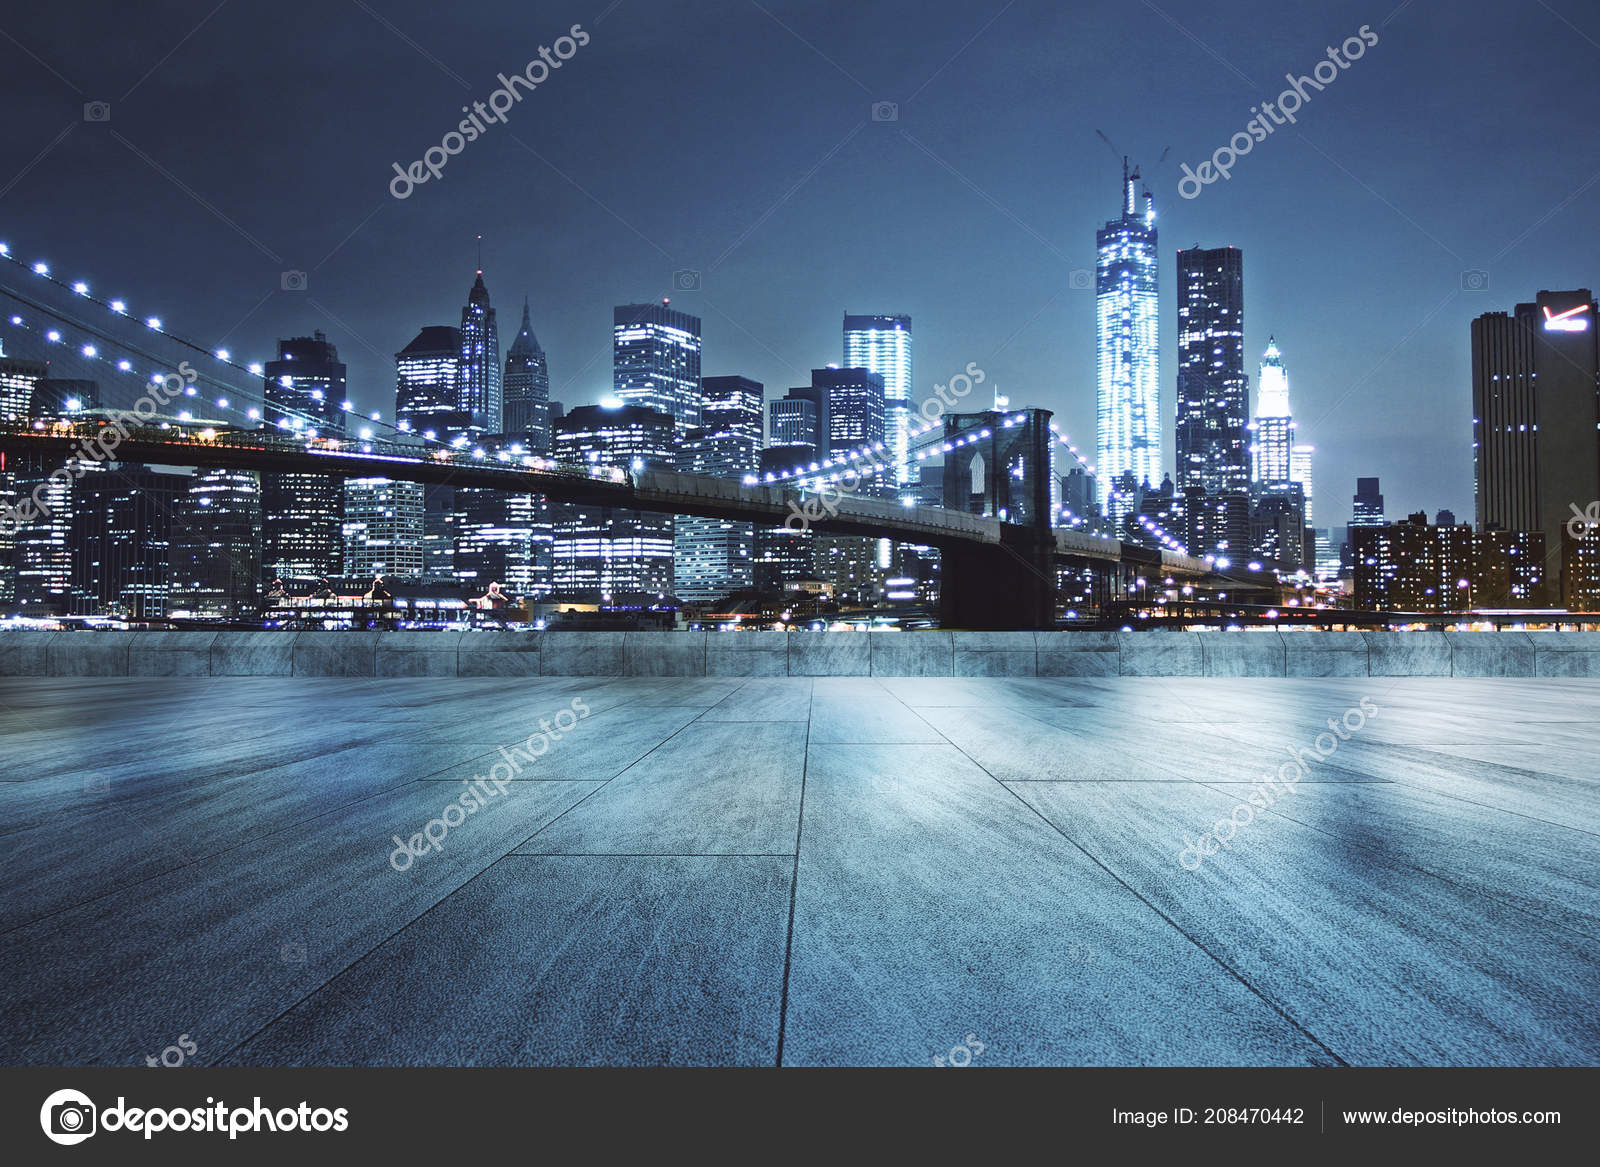 Concrete Rooftop Beautiful Night City View Background Stock Photo By C Peshkov